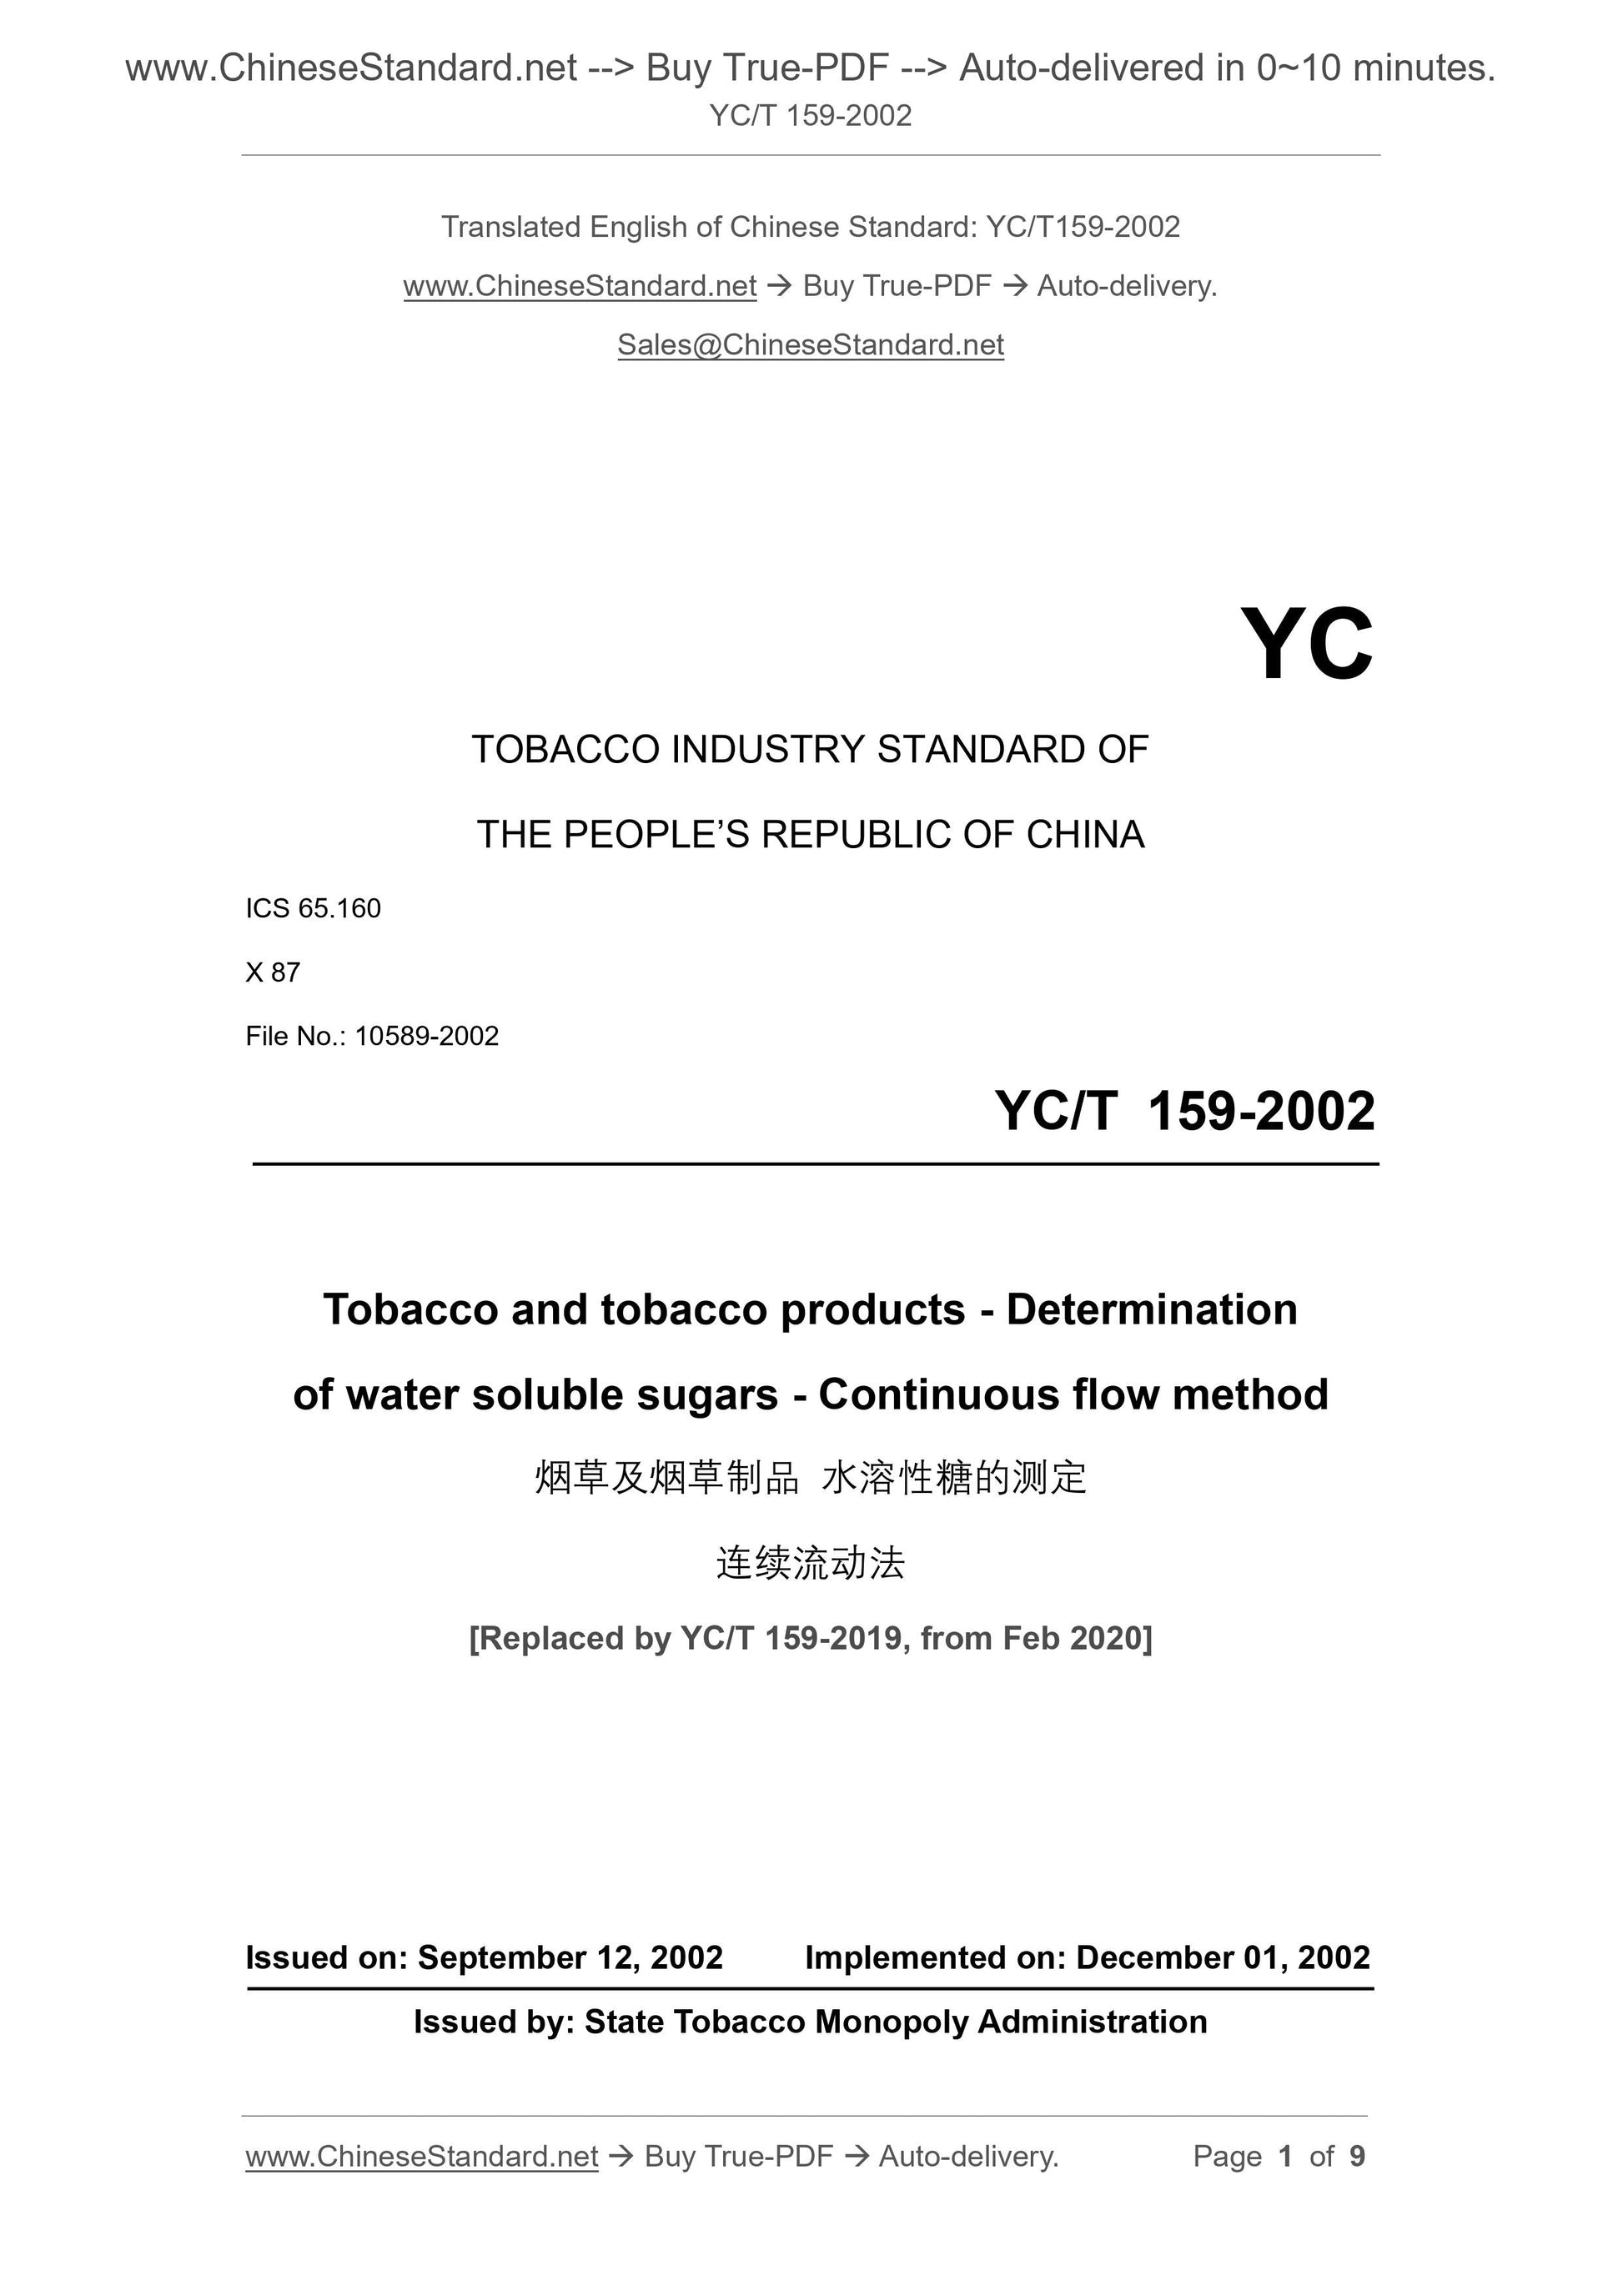 YC/T 159-2002 Page 1